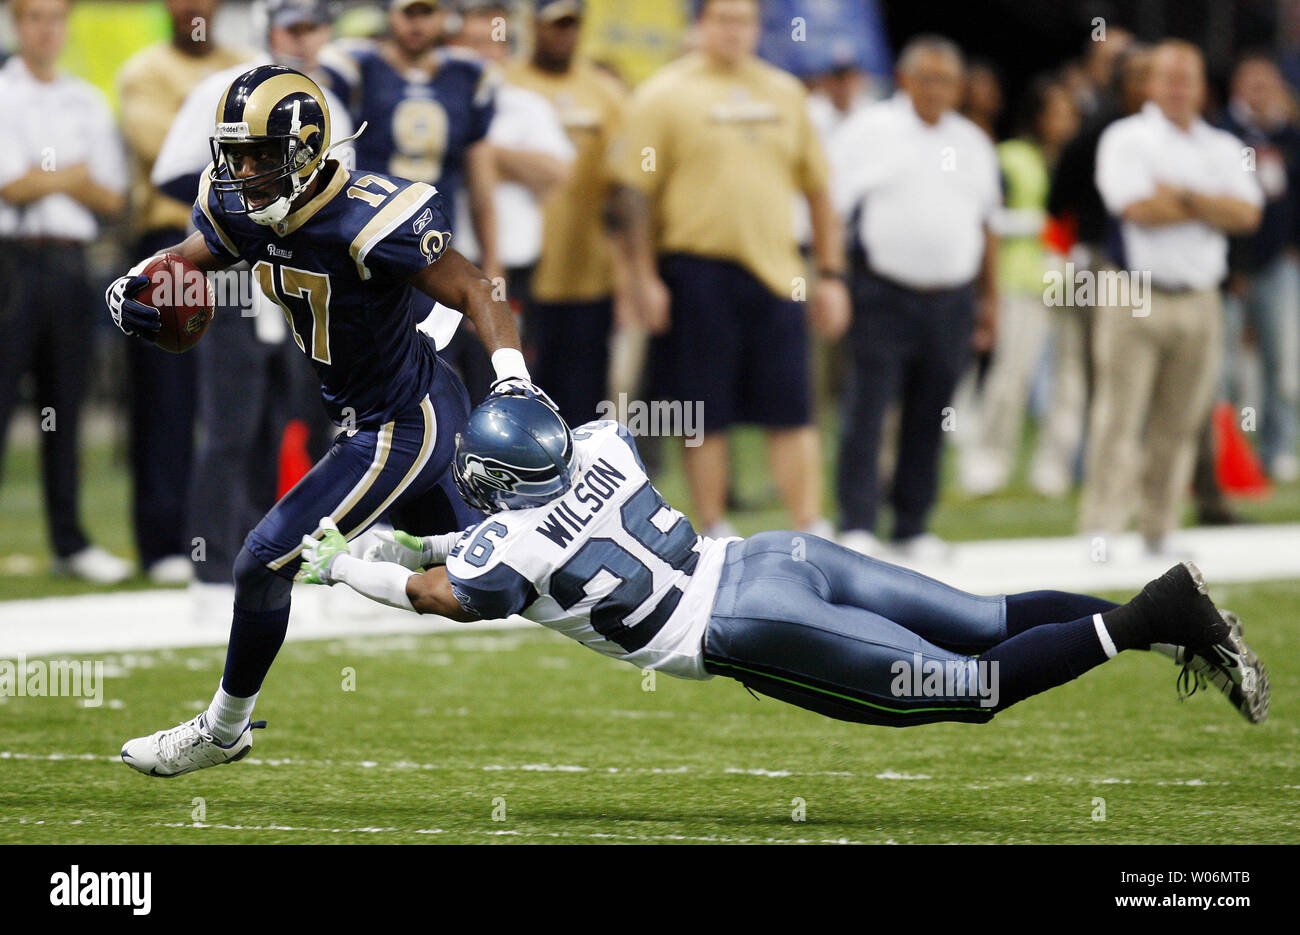 St. Louis Rams Donnie Avery (L) eludes the tackle by Seattle Seahawks Josh Wilson in the first quarter at the Edward Jones Dome in St. Louis on November 29, 2009. Seattle defeated St. Louis 27-17.    UPI/Bill Greenblatt Stock Photo